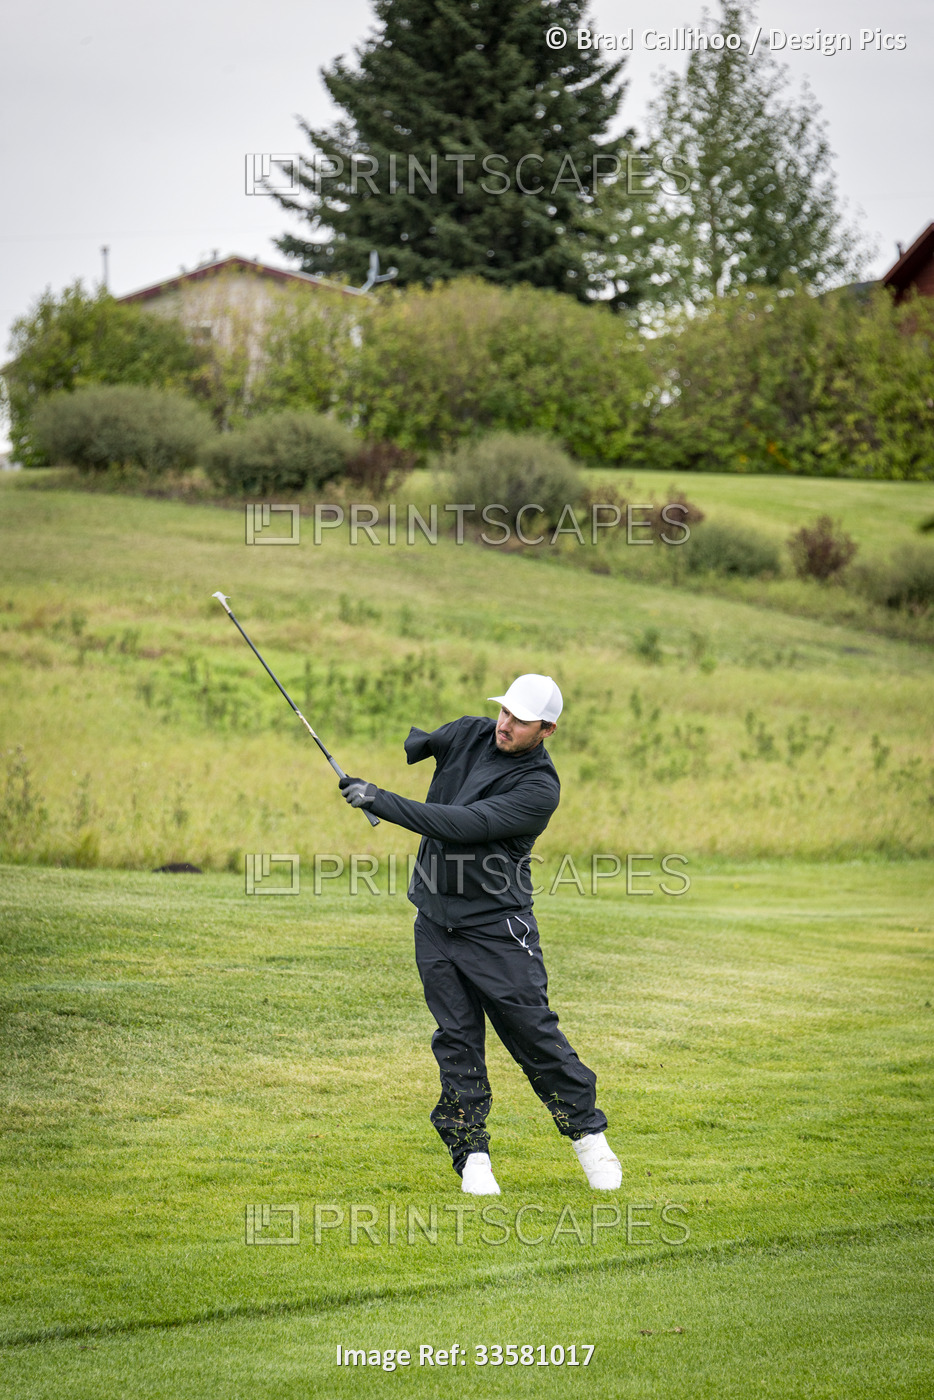 Amputee with one arm taking a swing on the golf course; Okotoks, Alberta, Canada